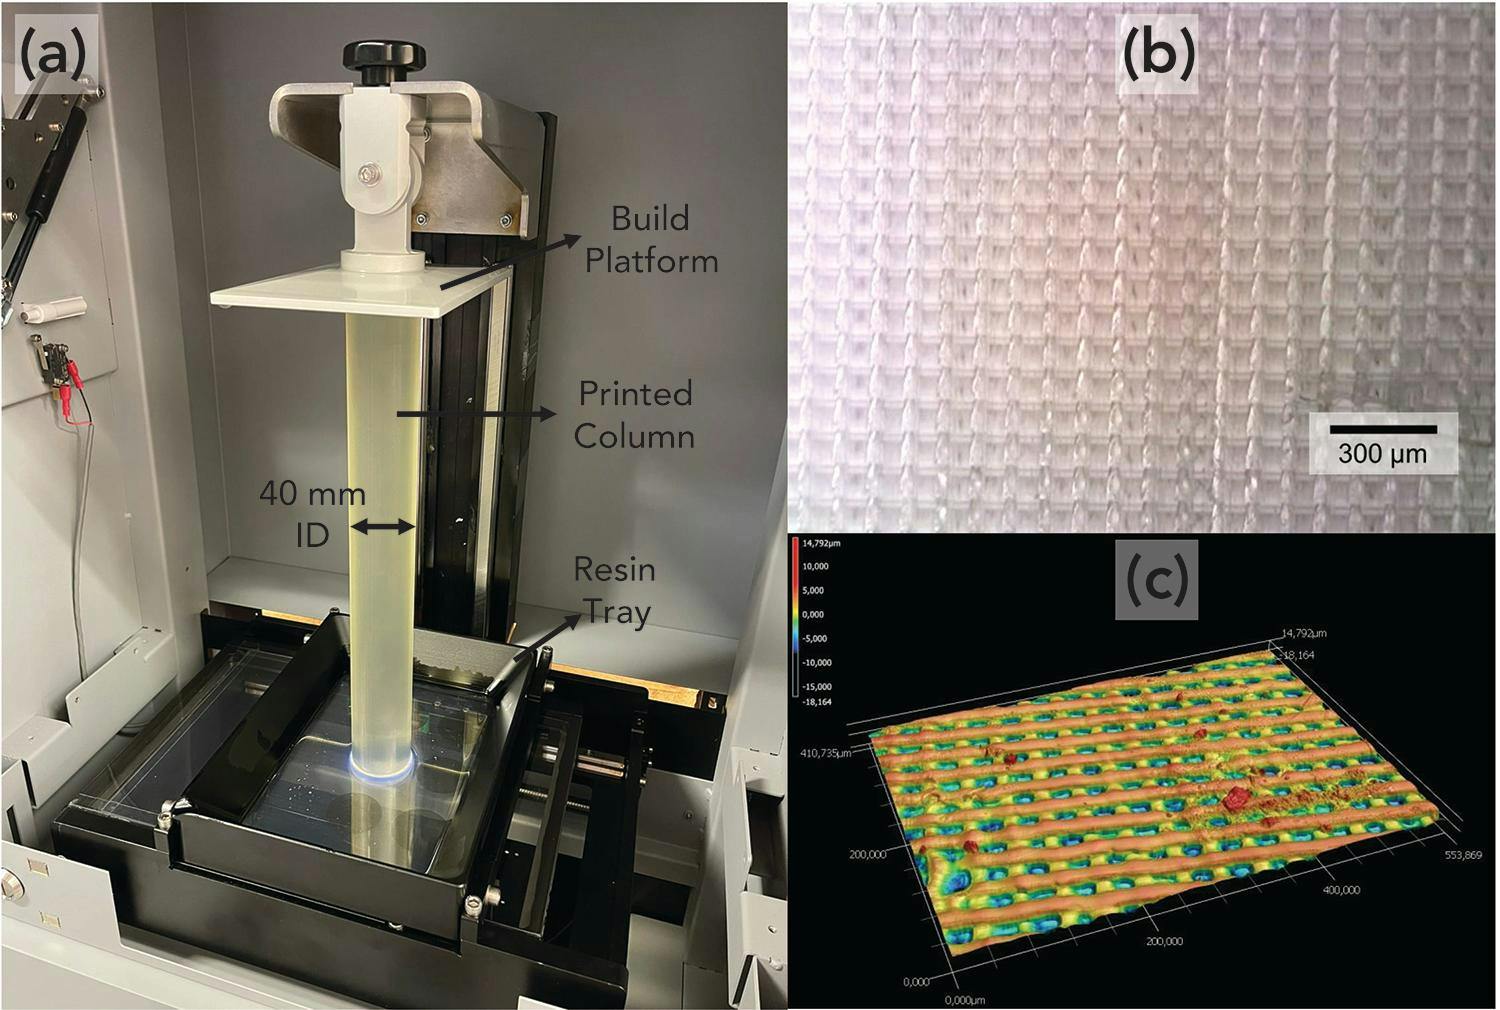 Figure 1: (a) Prototype hybrid stereolithography (HSLA) setup. A 40-mm i.d., 40-cm length column with a pore size of 50 µm is being printed using a commercial UV-curable resin. (b) An axial cutaway of the 50-µm printed lattice, and (c) optical profilometer scan of a radial cross-section of a 20 µm printed lattice.